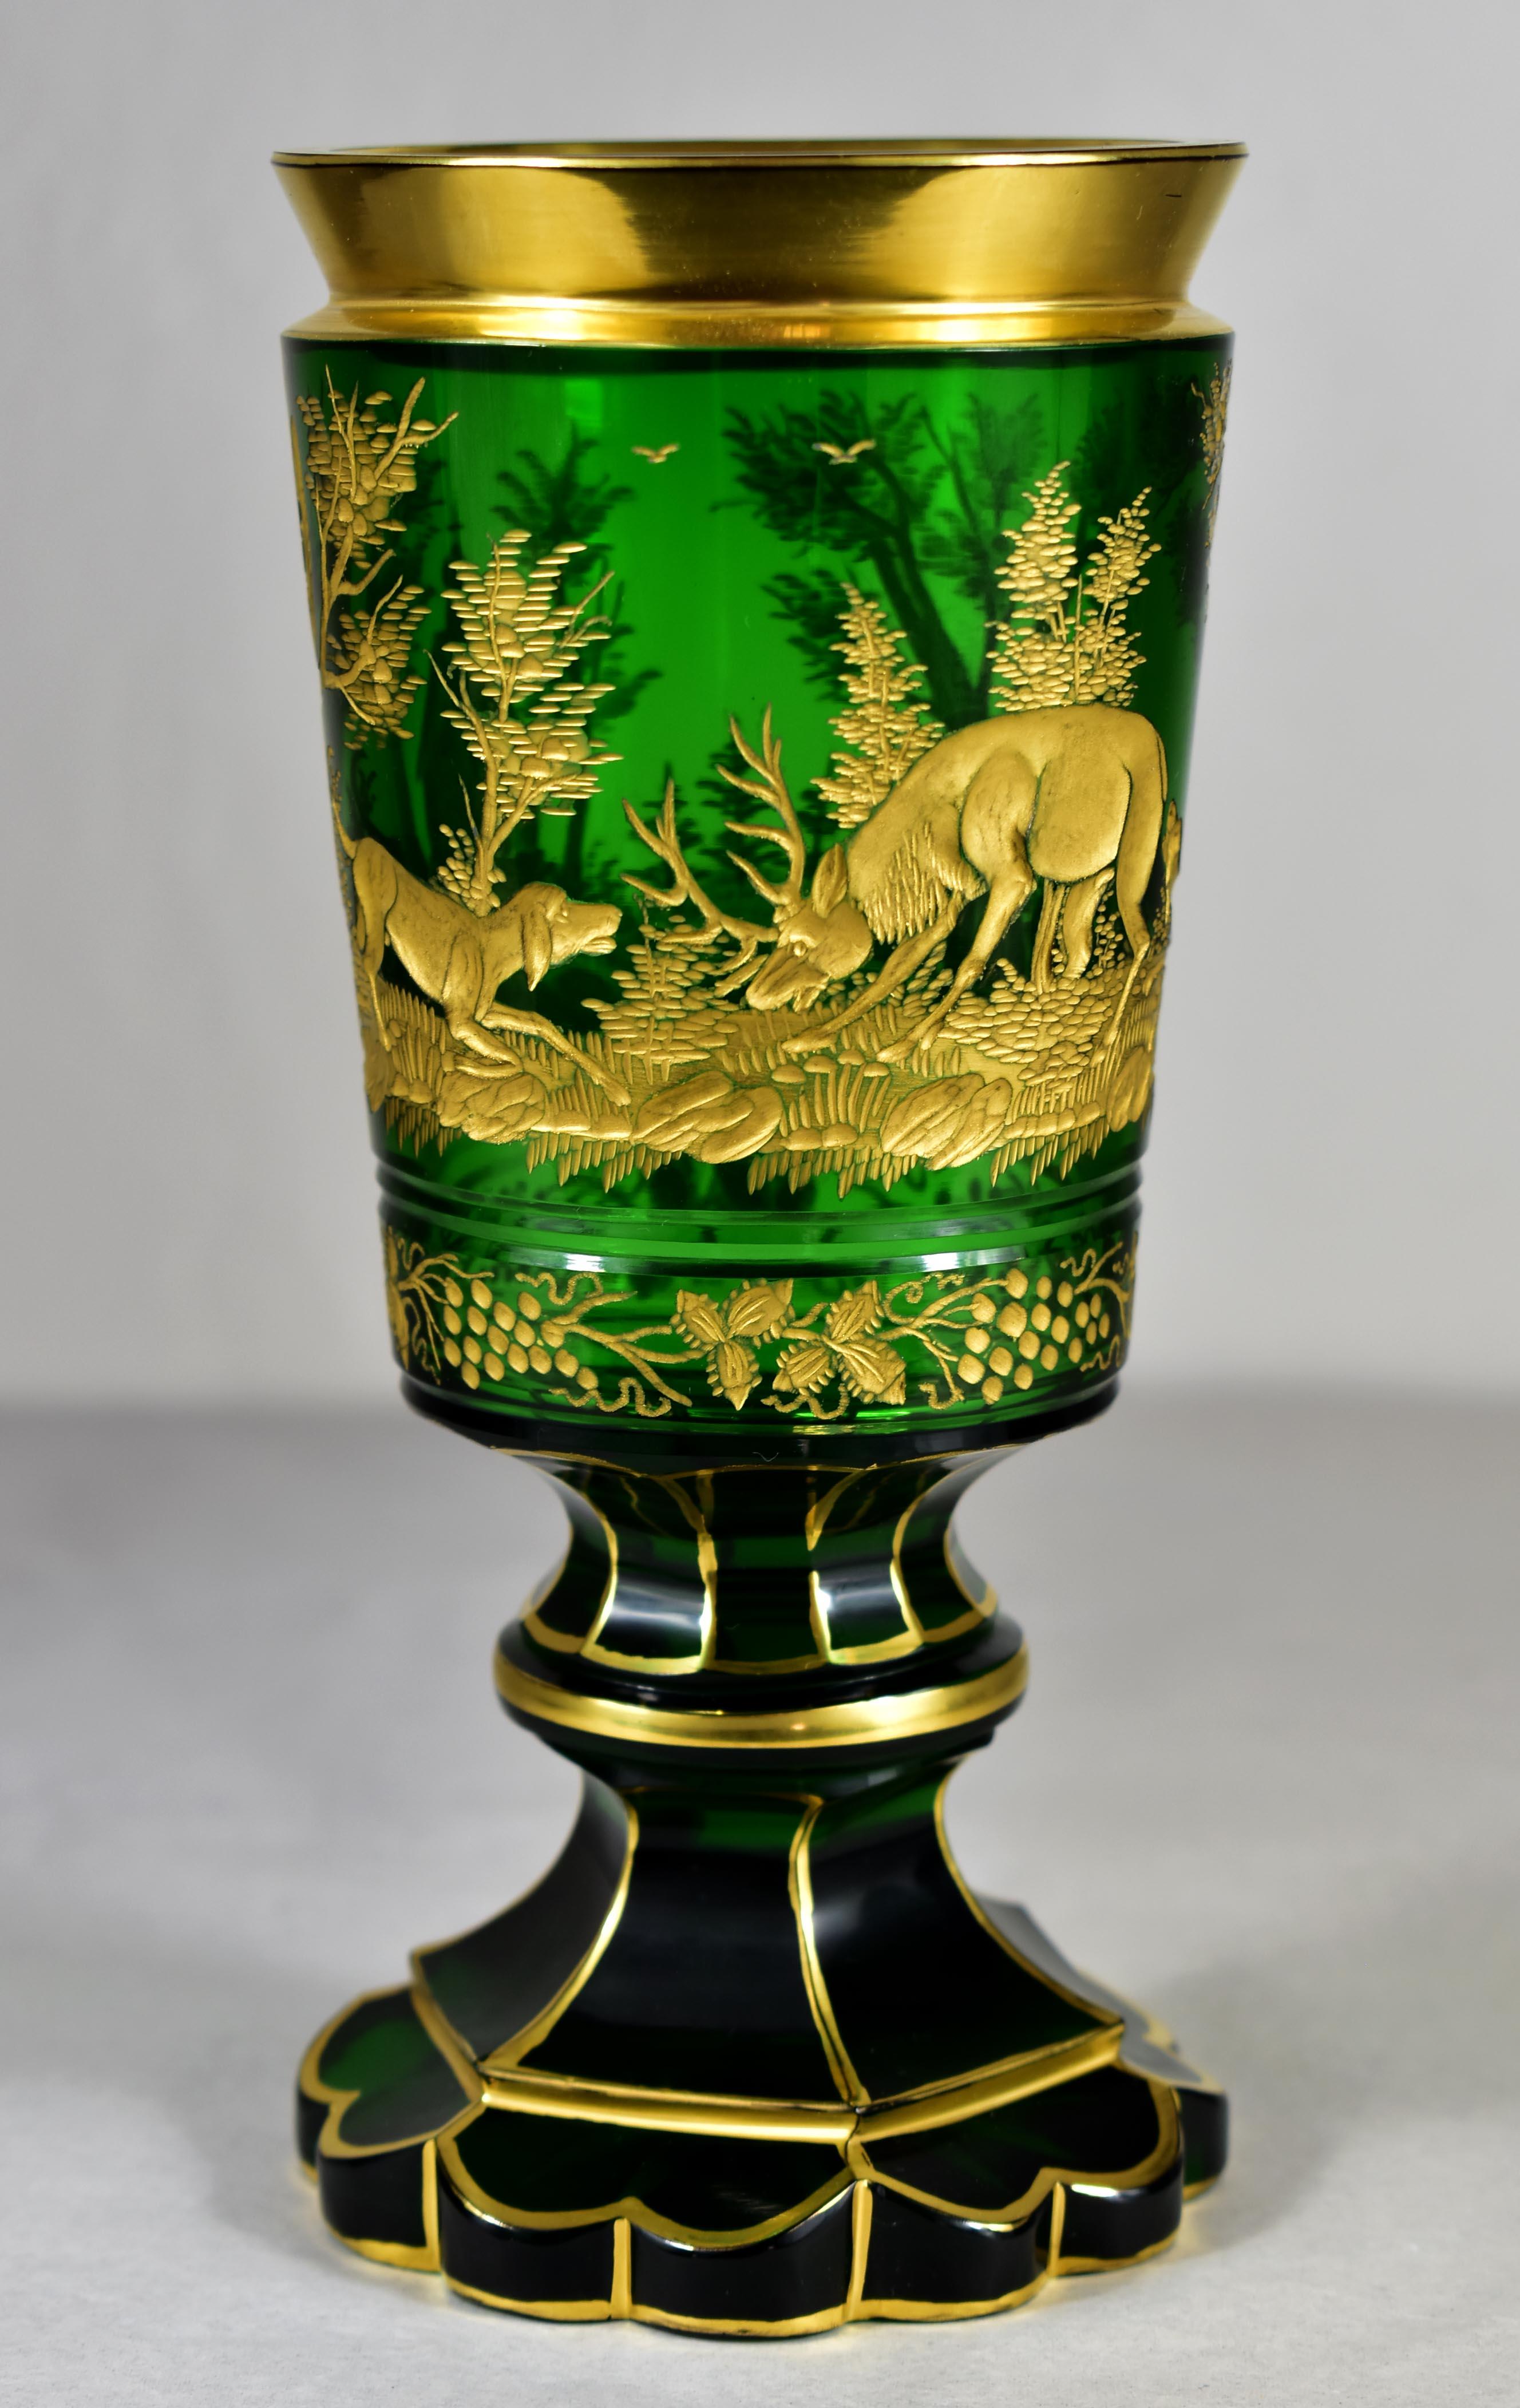 A beautiful glass goblet made of green glass, the goblet is cut, decorated with an engraving of a hunting motif. Motif depicting a deer defending itself from hunting dogs, Next, nature is depicted with the architecture of the chapel. the cut edges